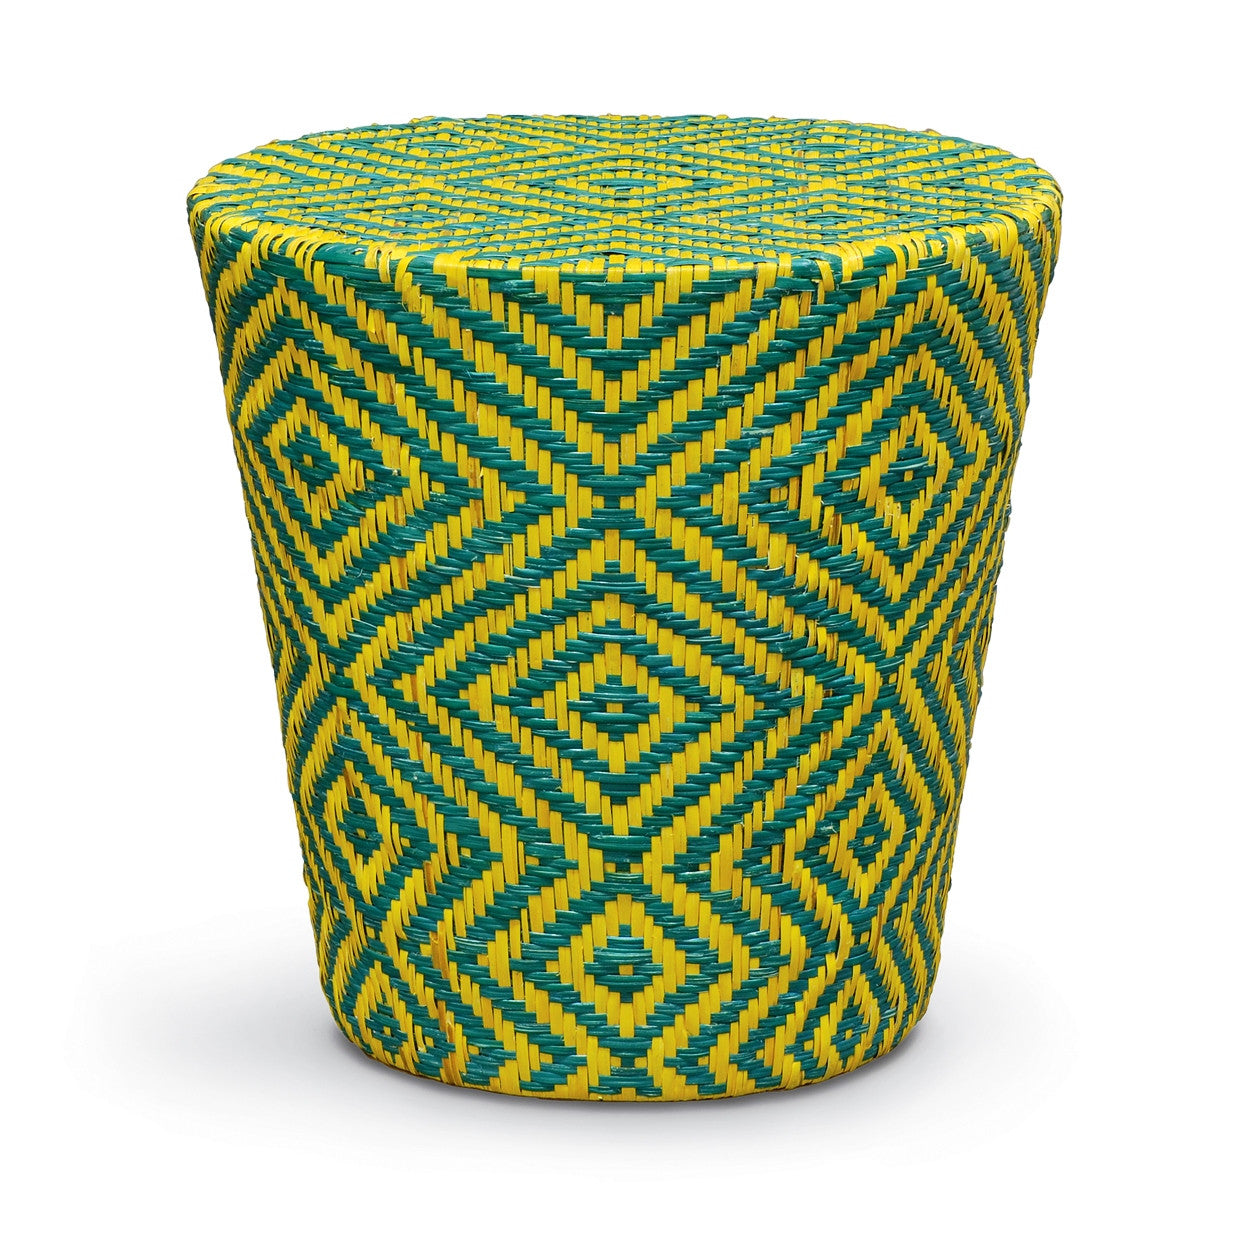 Woven Rattan Tapered Round Stool/Table